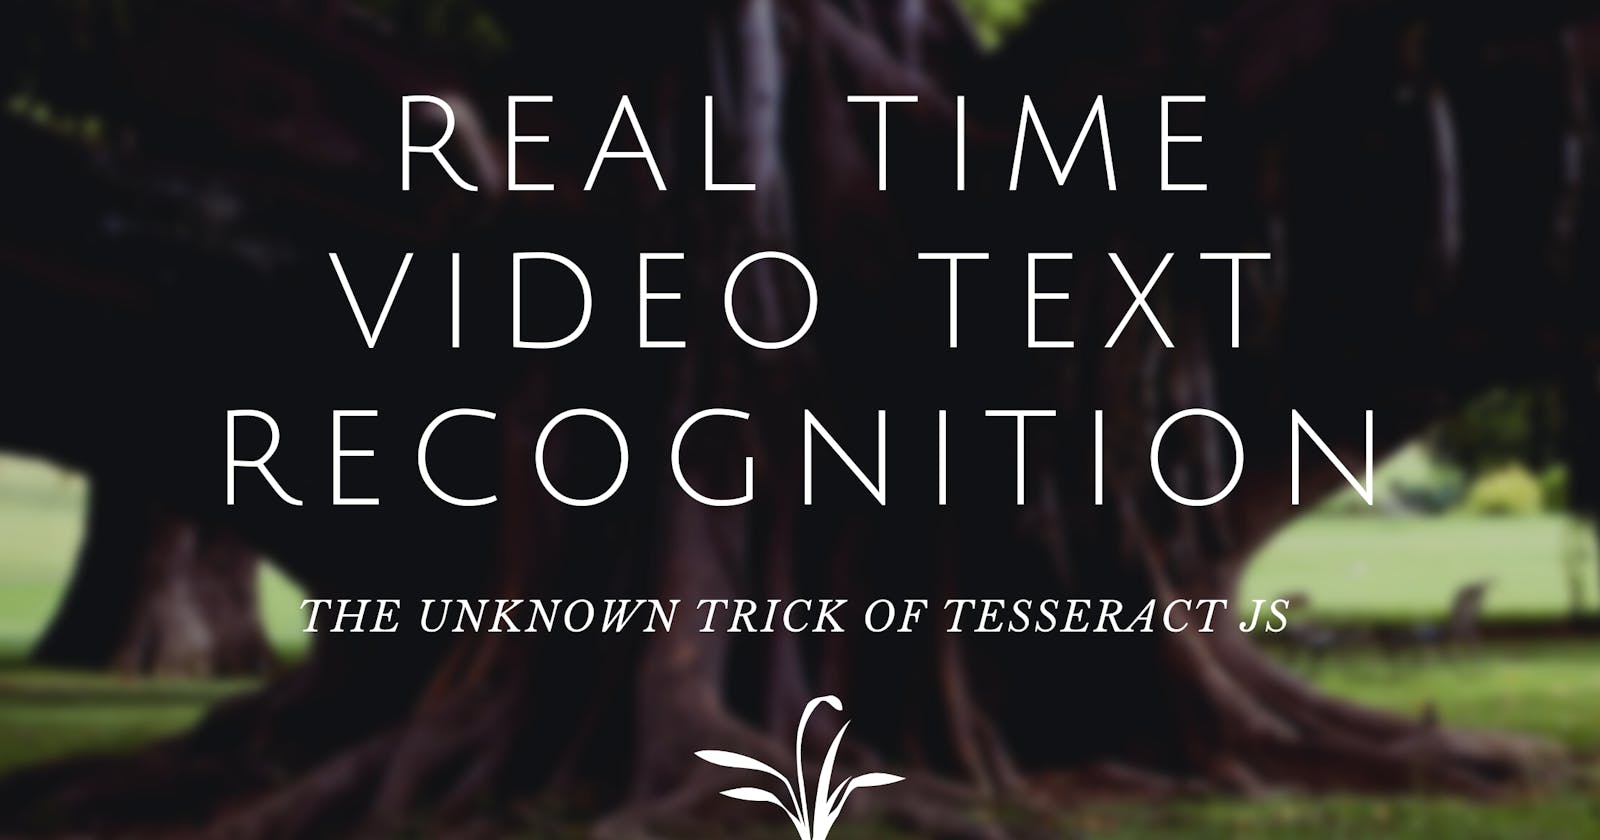 Building a real time video text recognition app using Tesseract JS and React